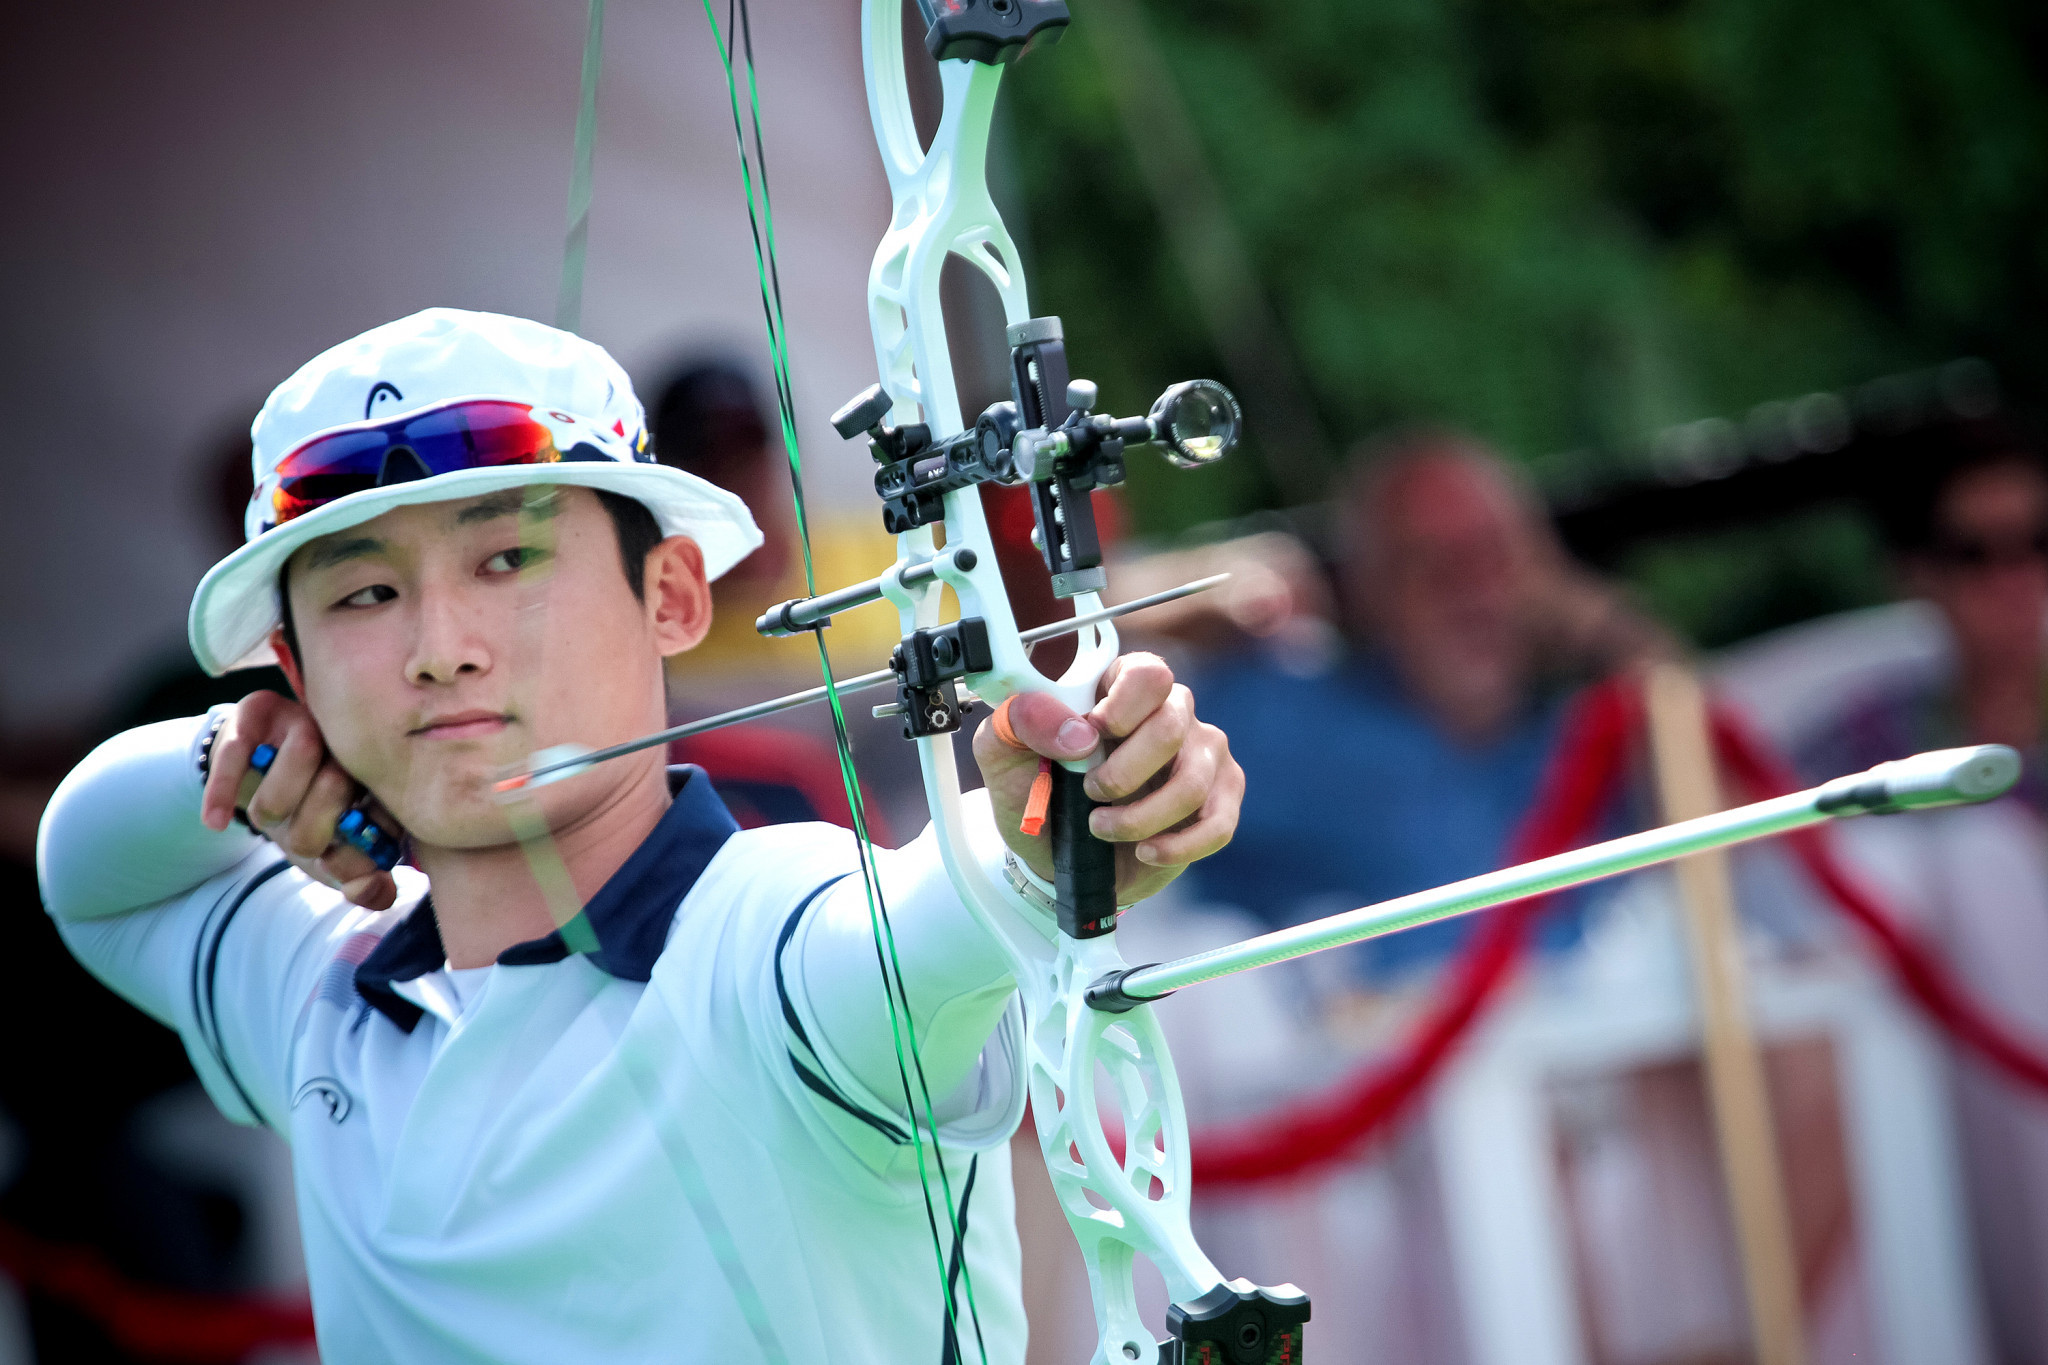 Kim Jongho was a victor in both of today's finals at the 2017 Asian Archery Championships ©Getty Images